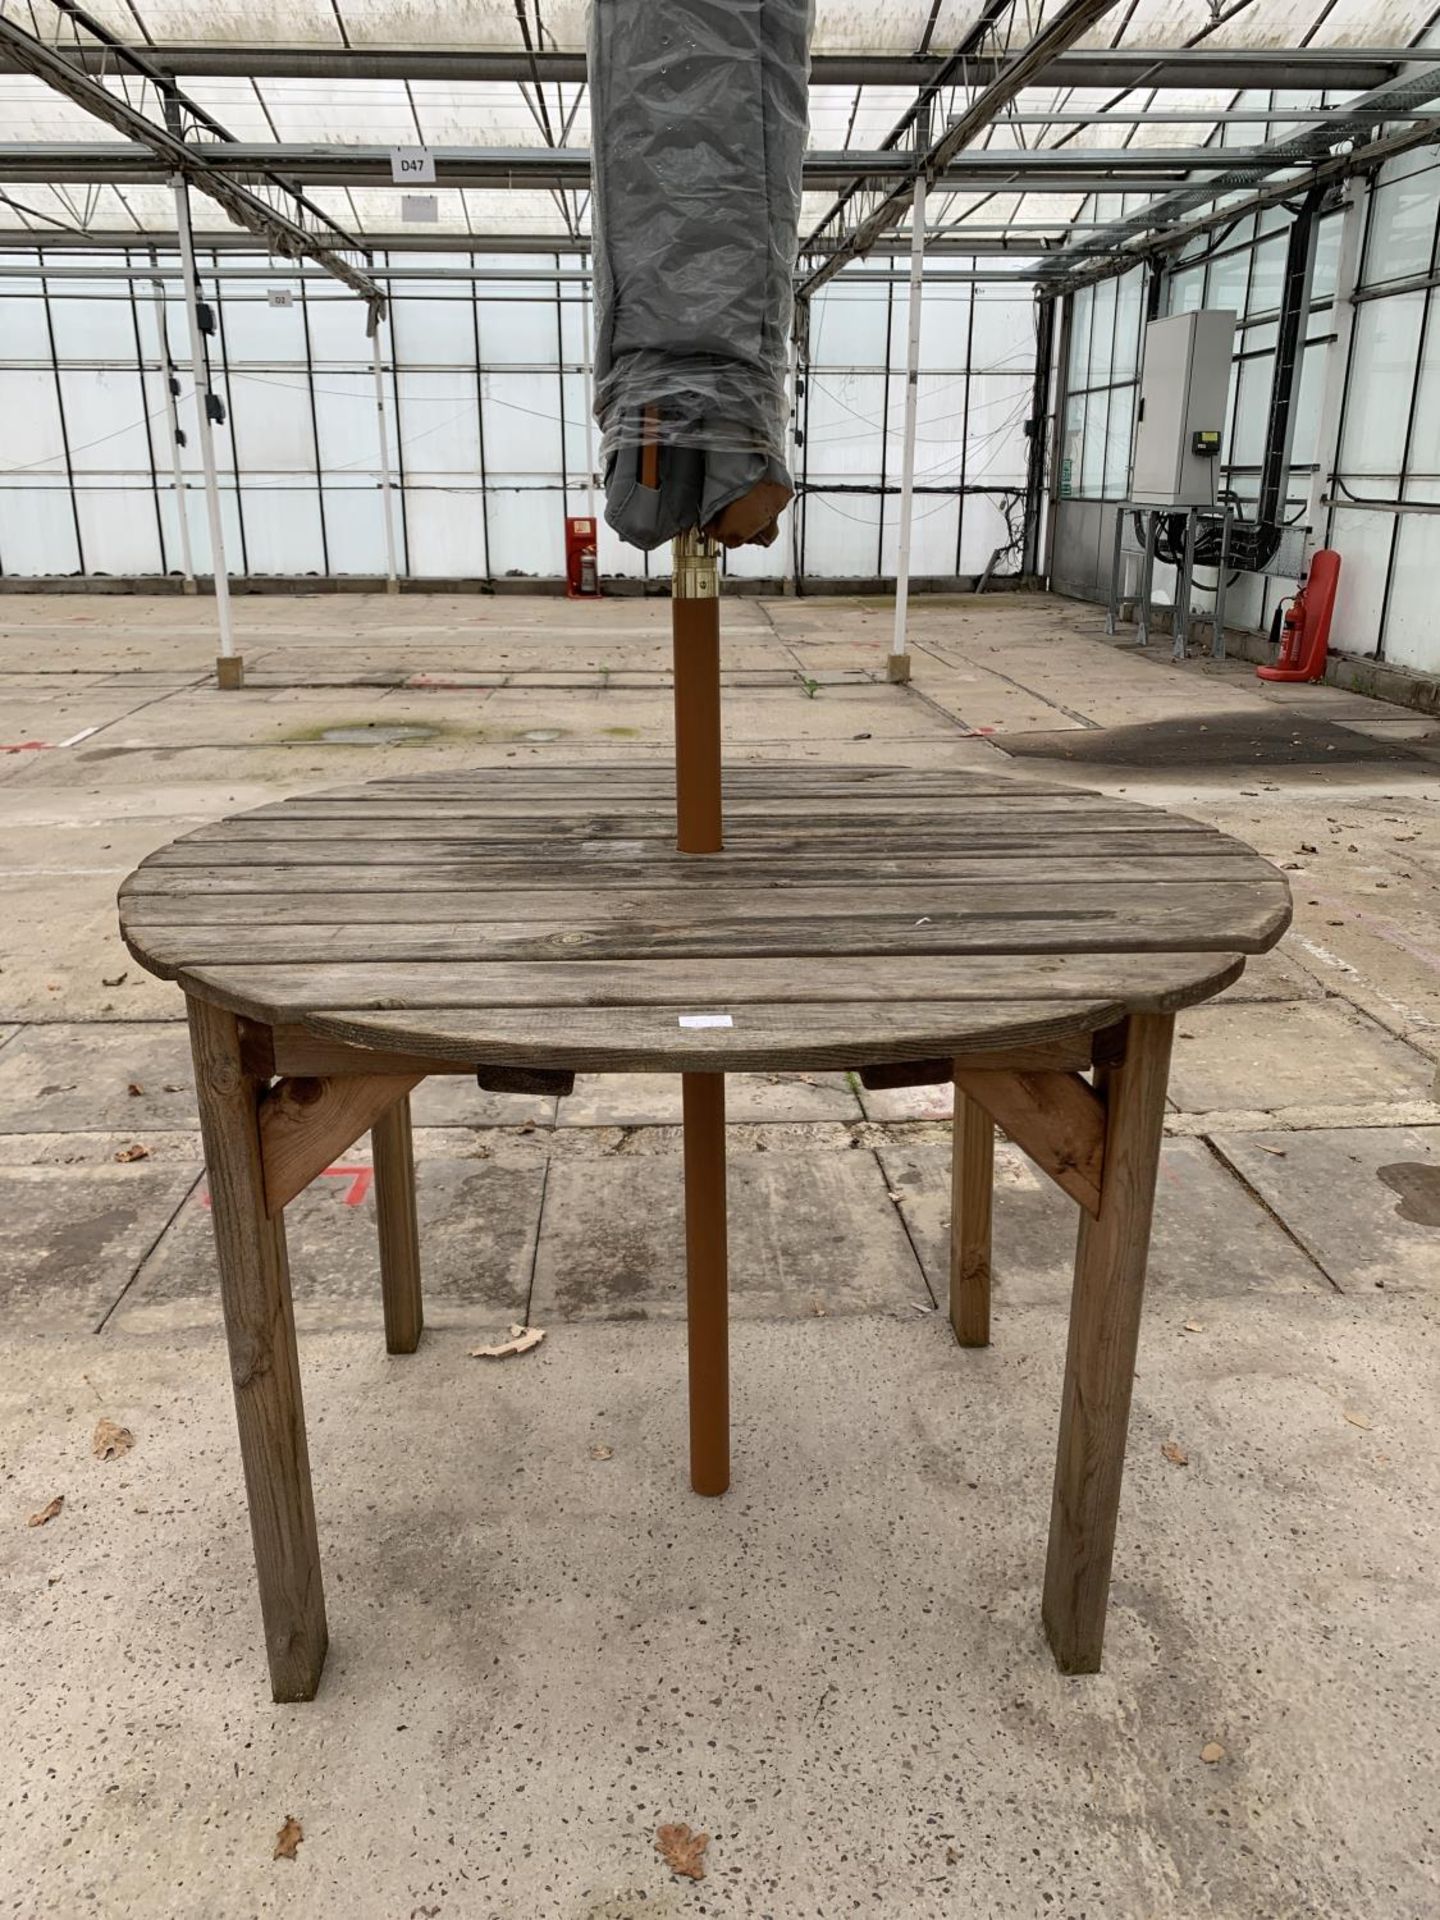 AN AS NEW EX DISPLAY CHARLES TAYLOR CIRCULAR TABLE WITH A GREY PARASOL + VAT - Image 2 of 3